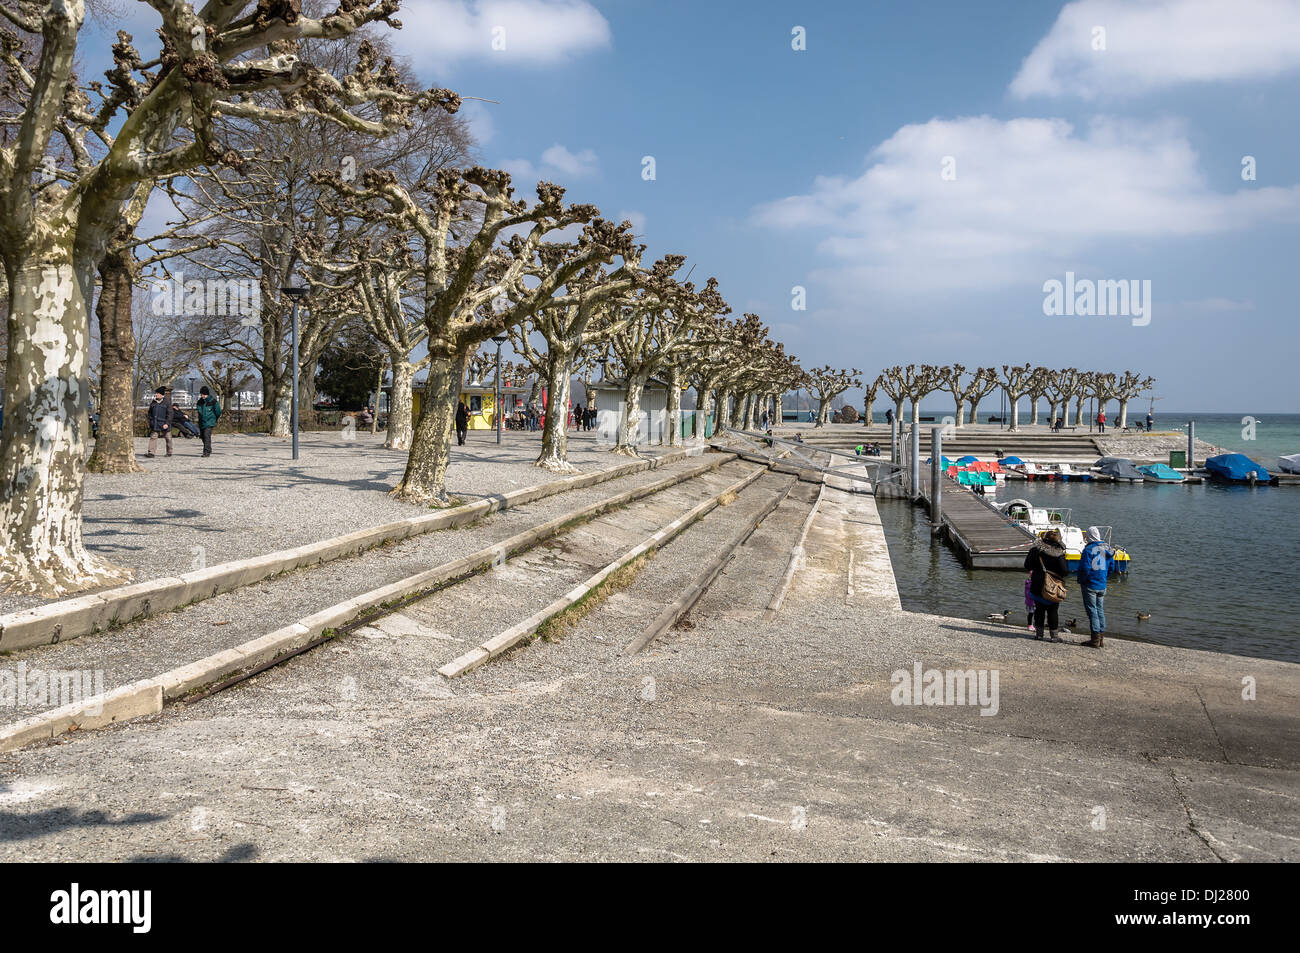 Konstanz, Germany: People on the lake shore. Stock Photo